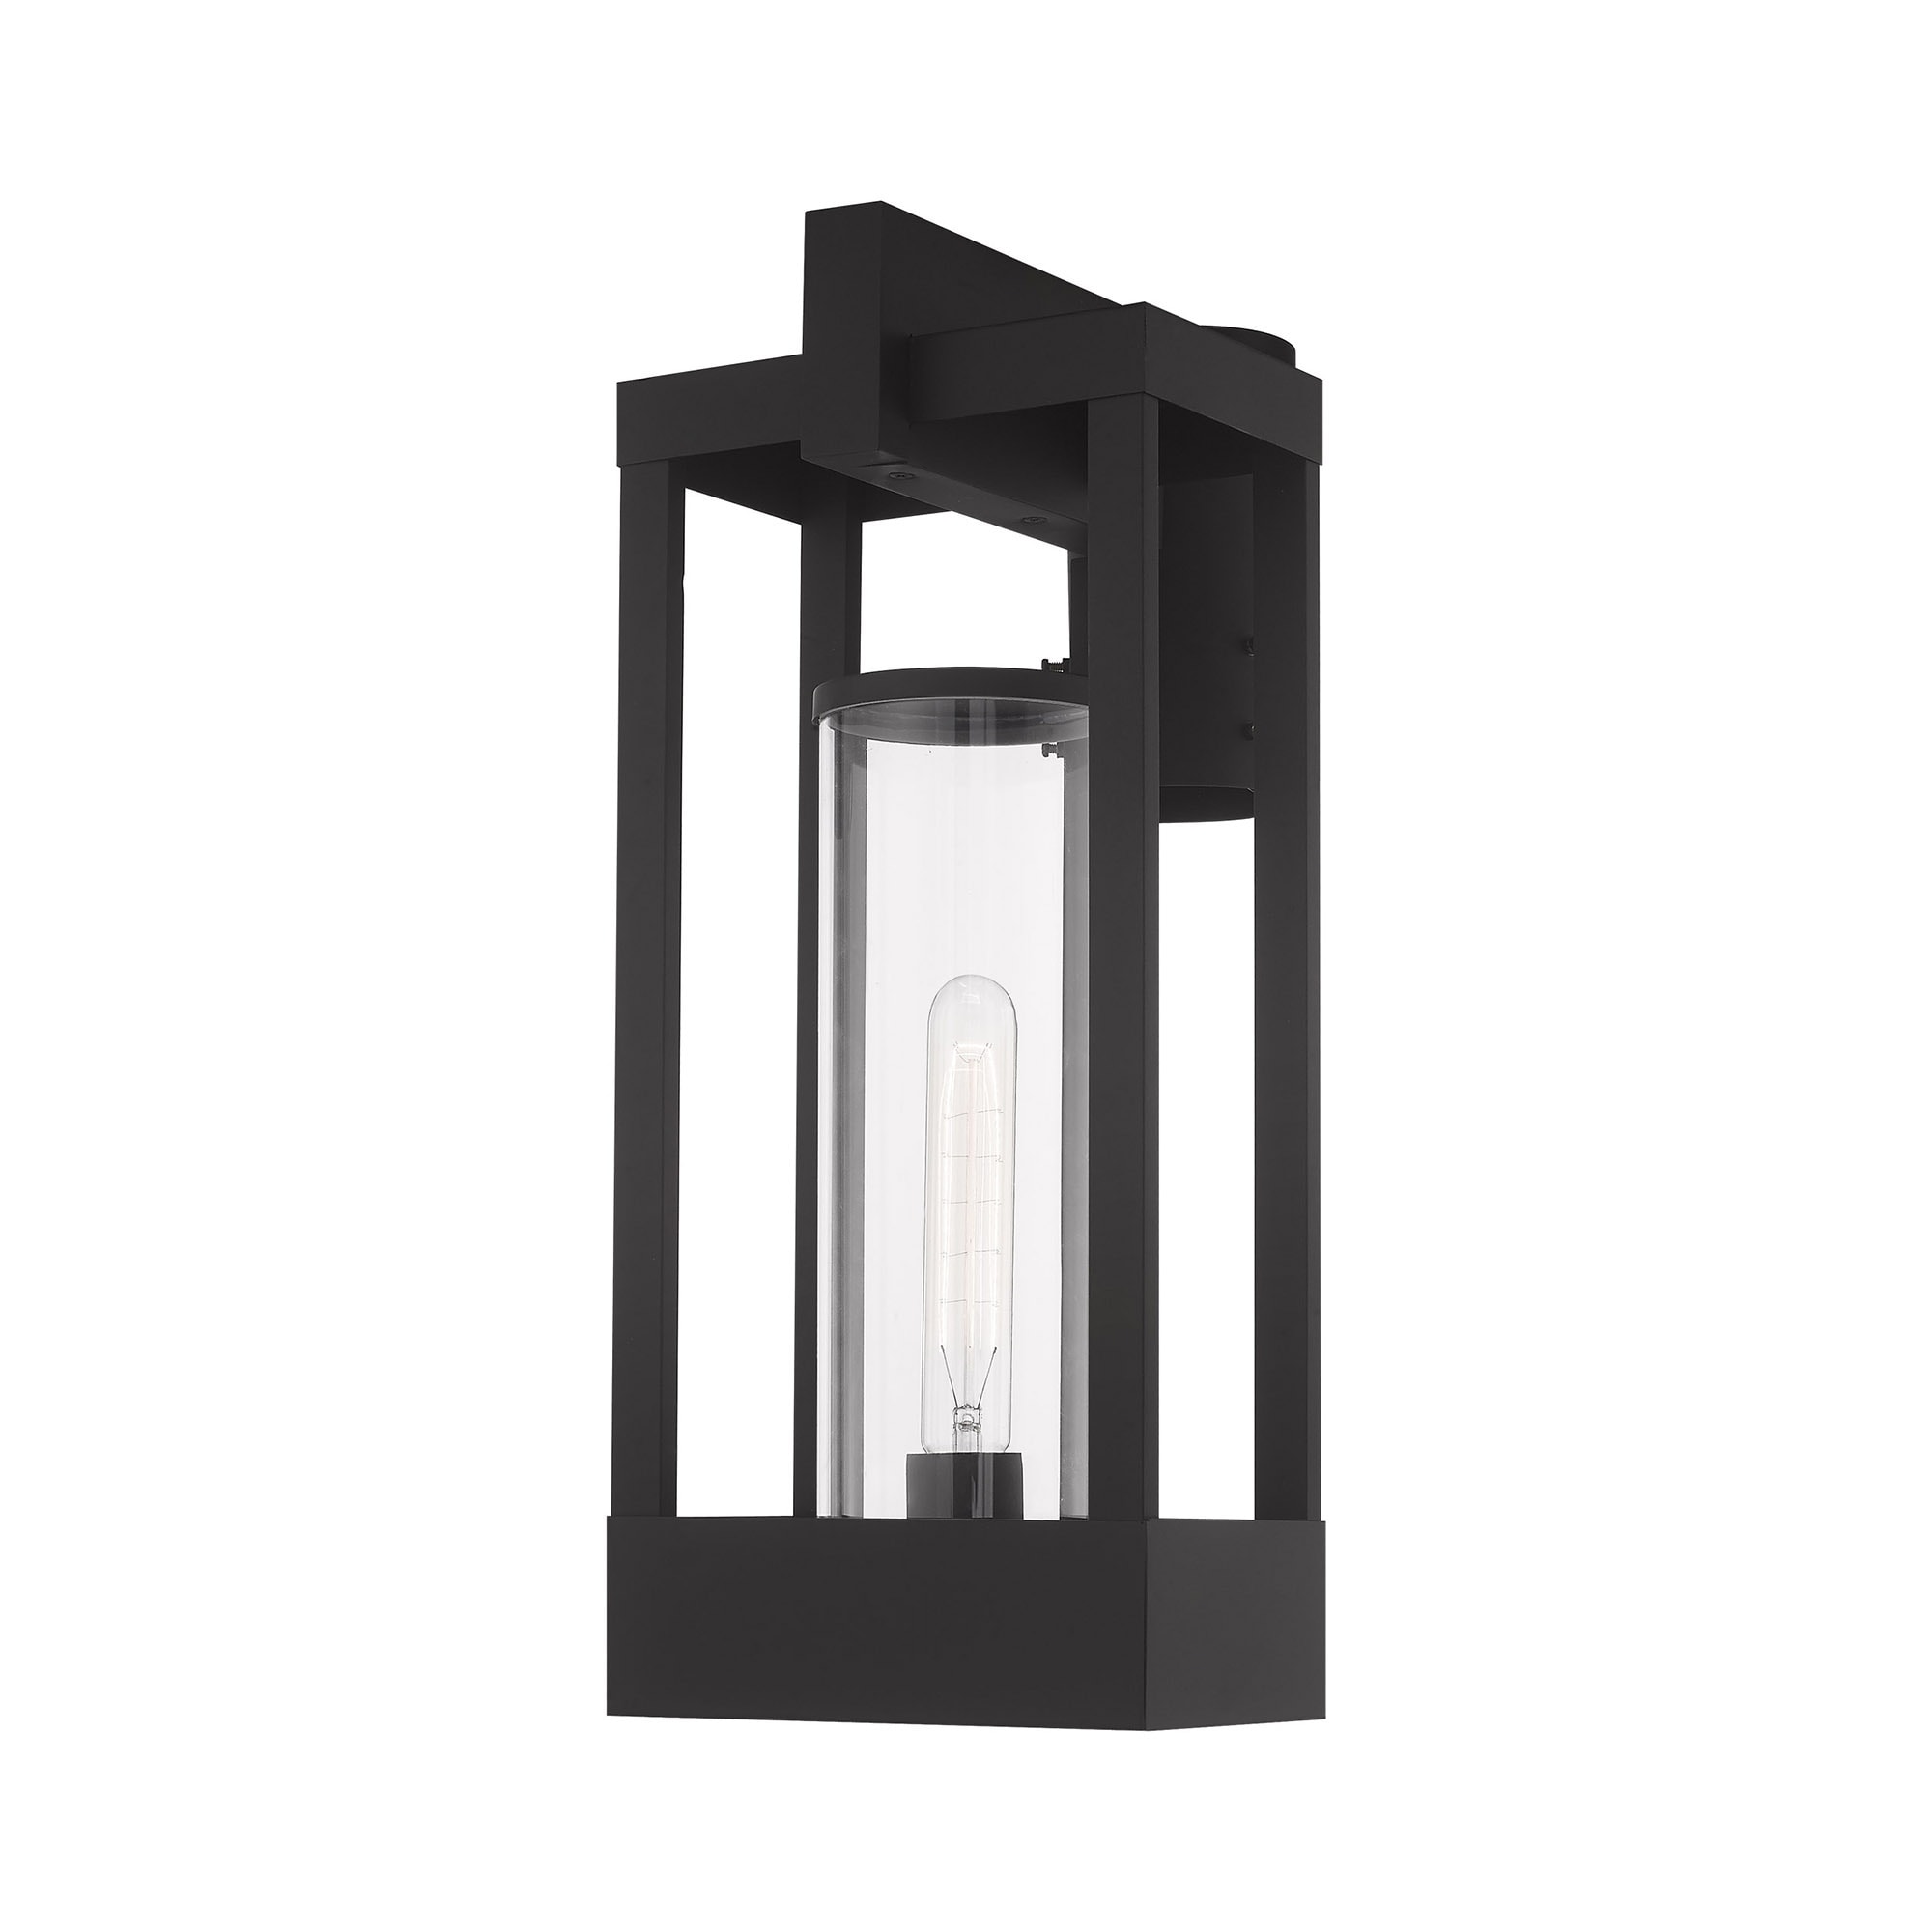 Livex Lighting - Delancey - 1 Light Outdoor Post Top Lantern in Contemporary - image 4 of 5